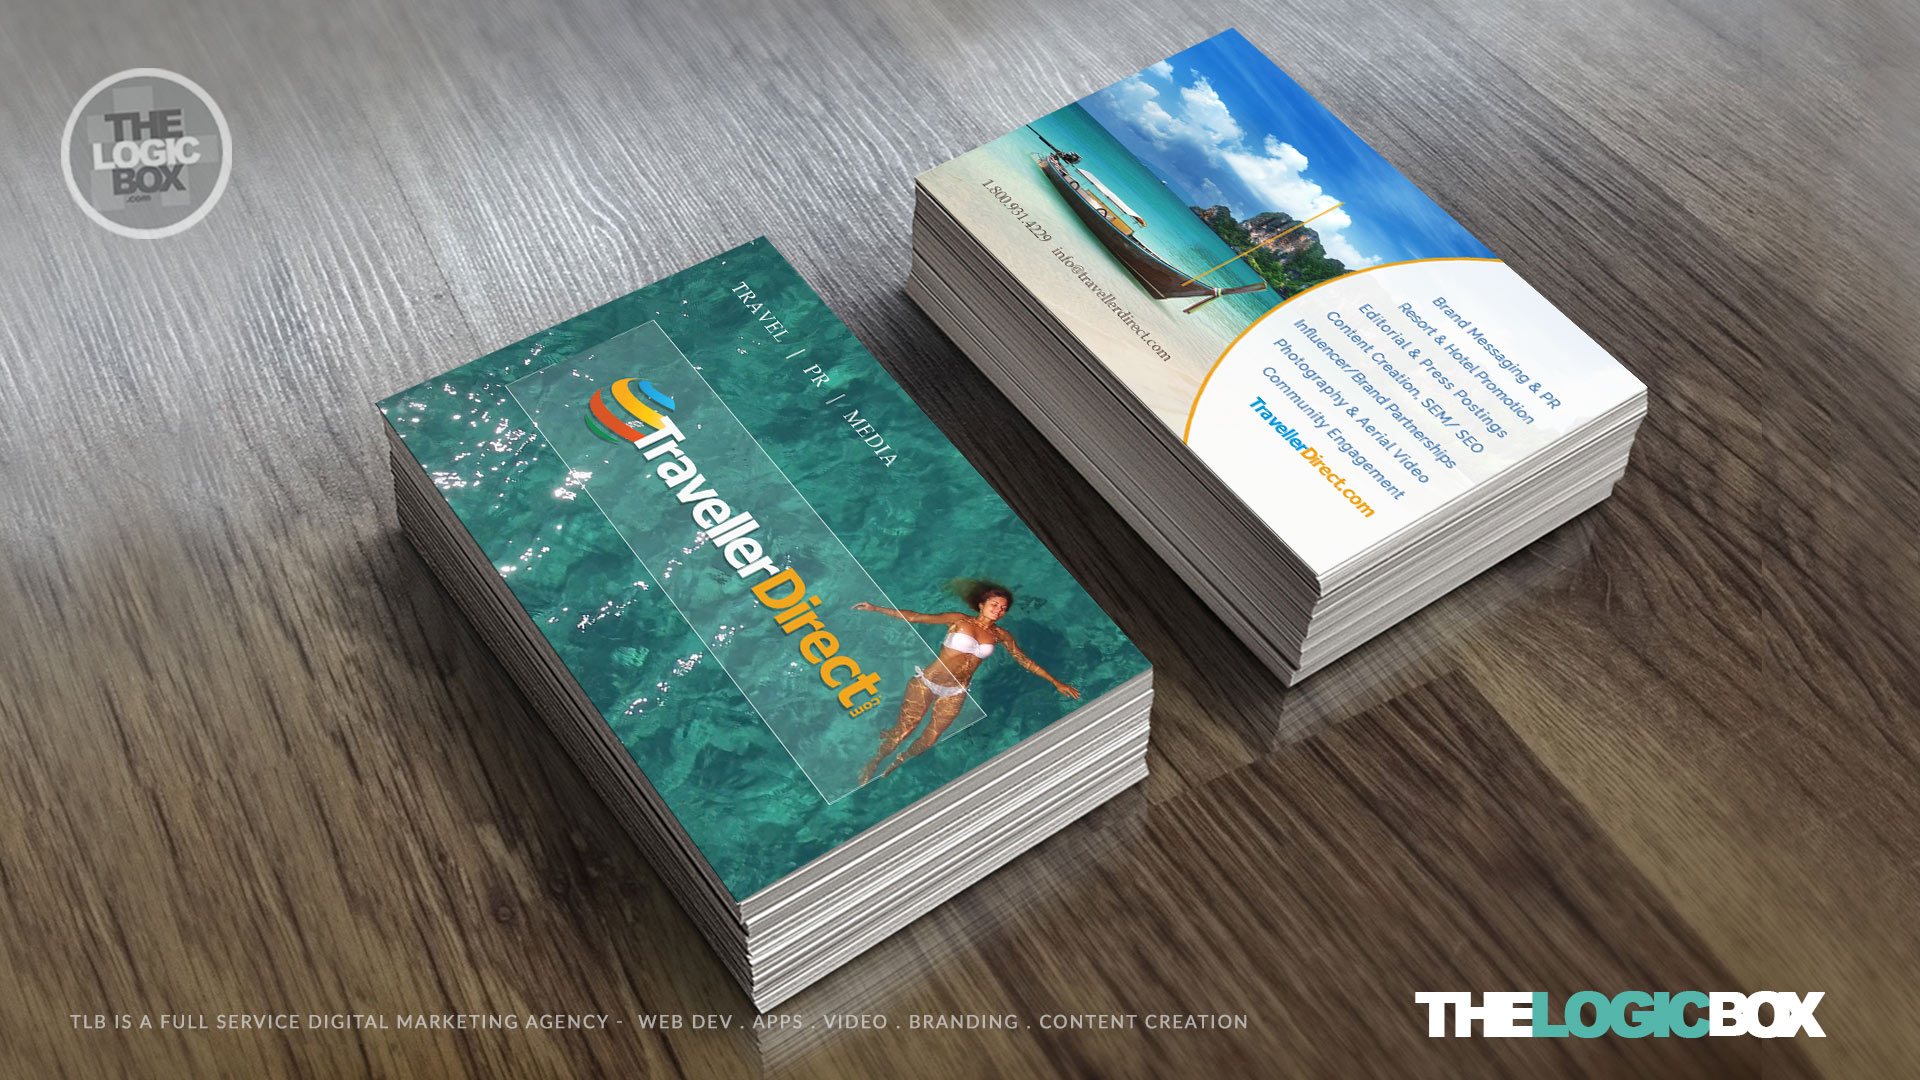 Business-Card-the-logic-box-agency-2-travellerdierct_1